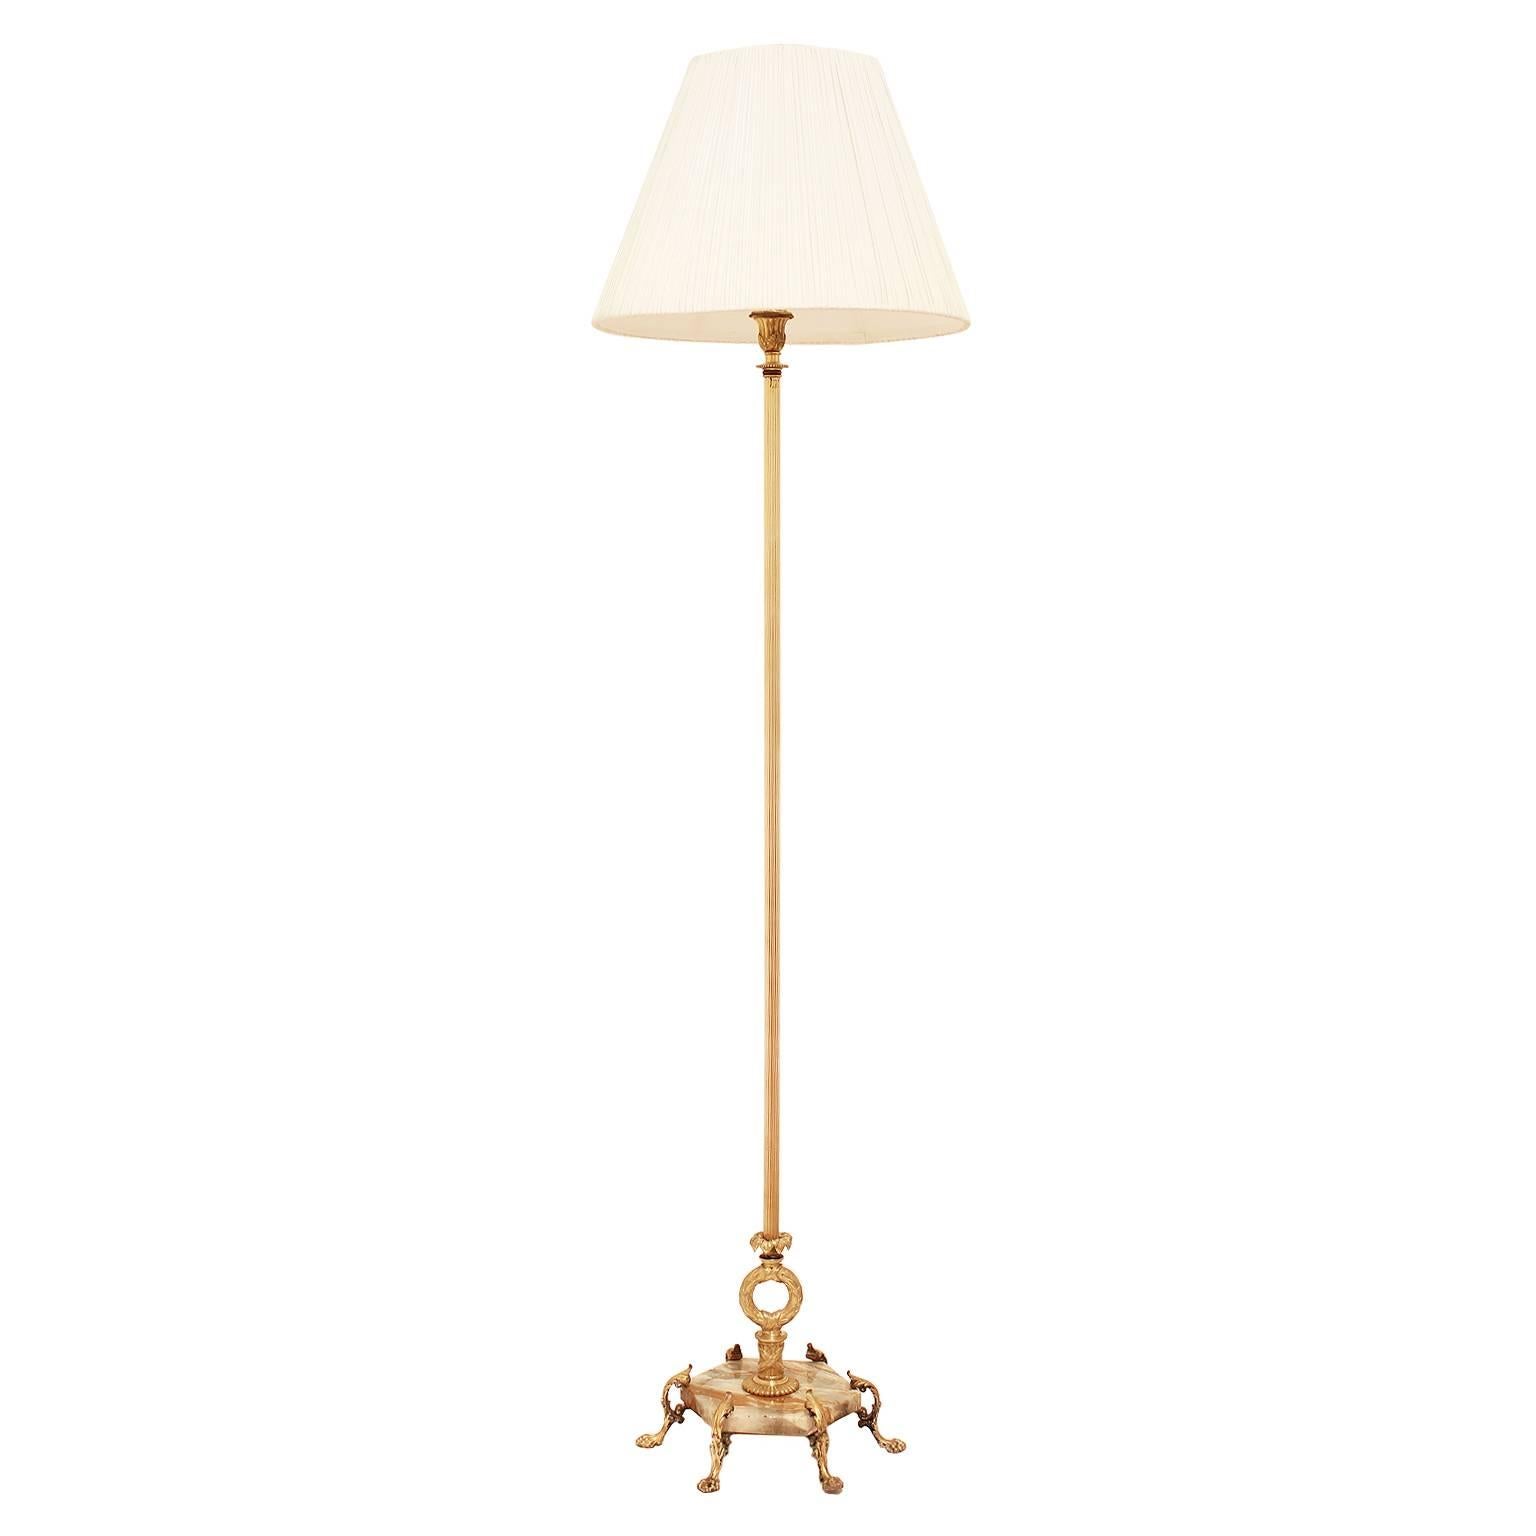 1920s French Claw Foot Brass Floor Lamp with Marble Base For Sale